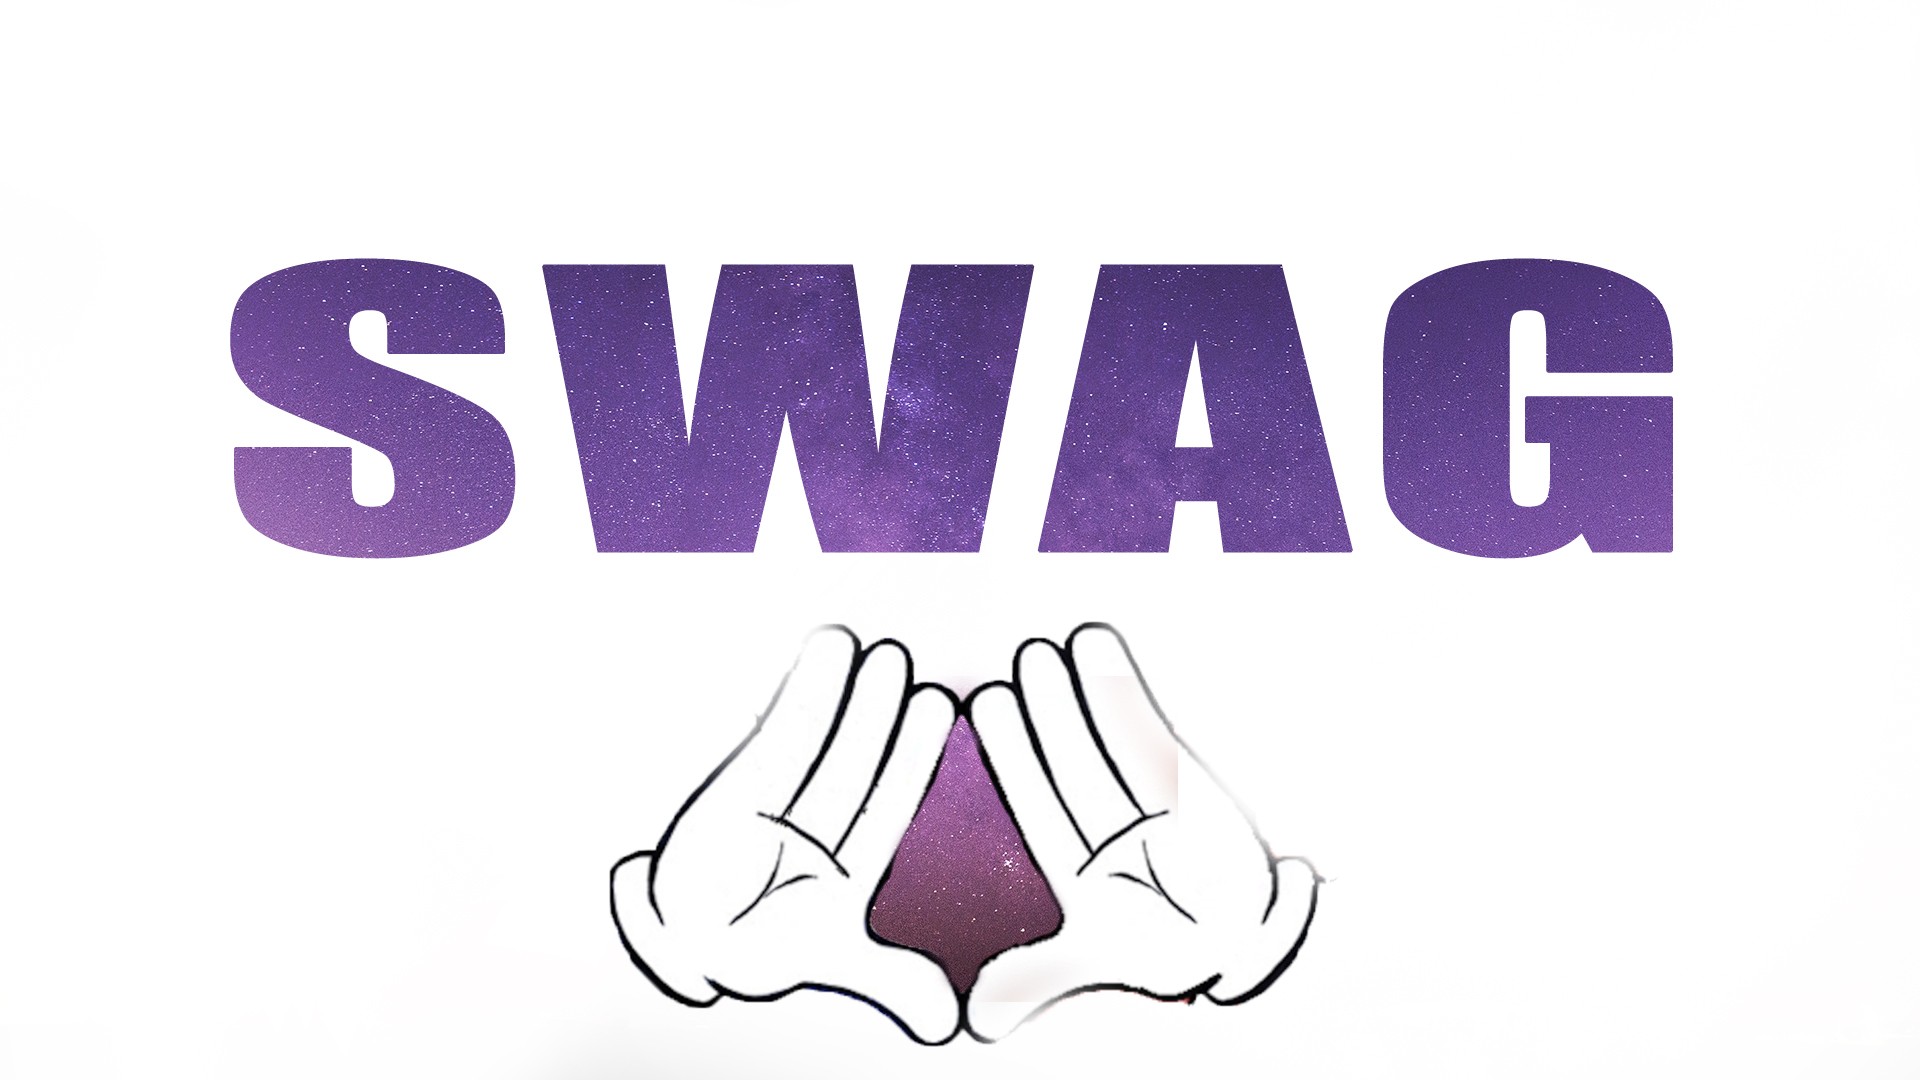 SWAGGAH, Triangle, Gloves, Universe, Stars, Dope, Trap Music Wallpaper